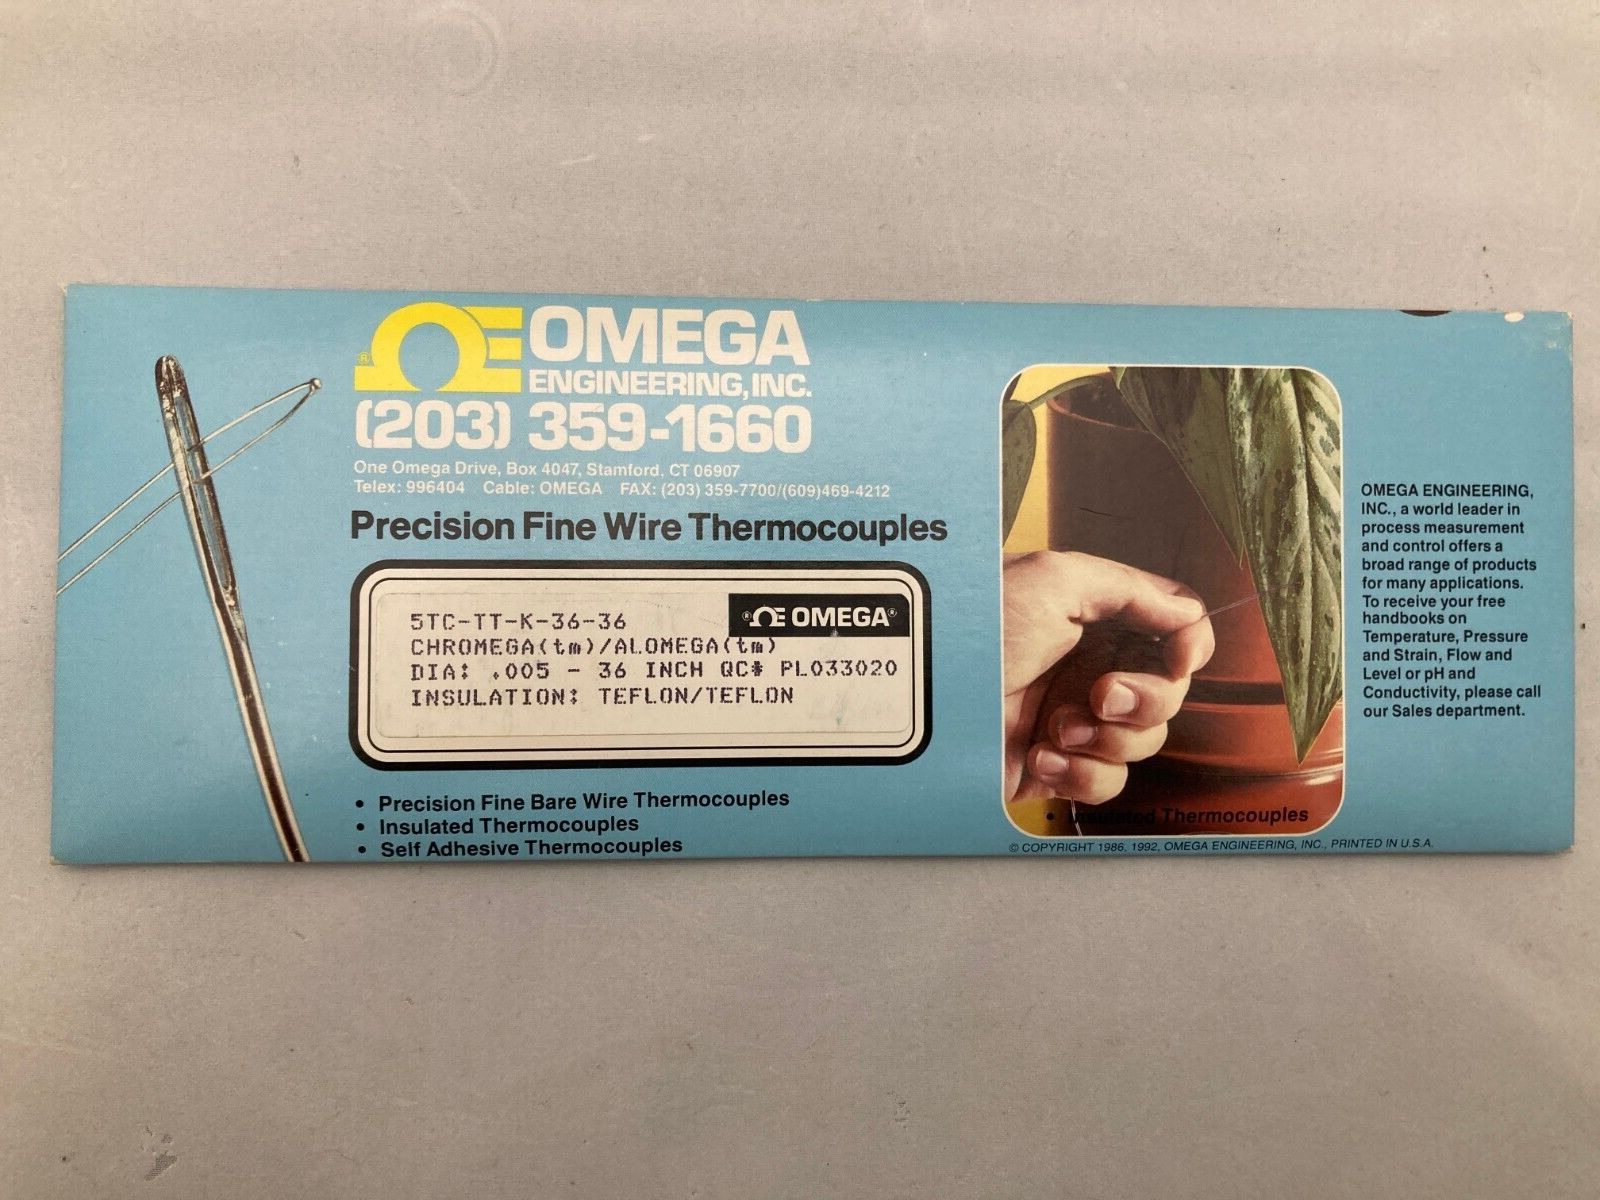 New Old Stock - OMEGA 5TC-TT-K-36-36 Type K Insulated Thermocouple